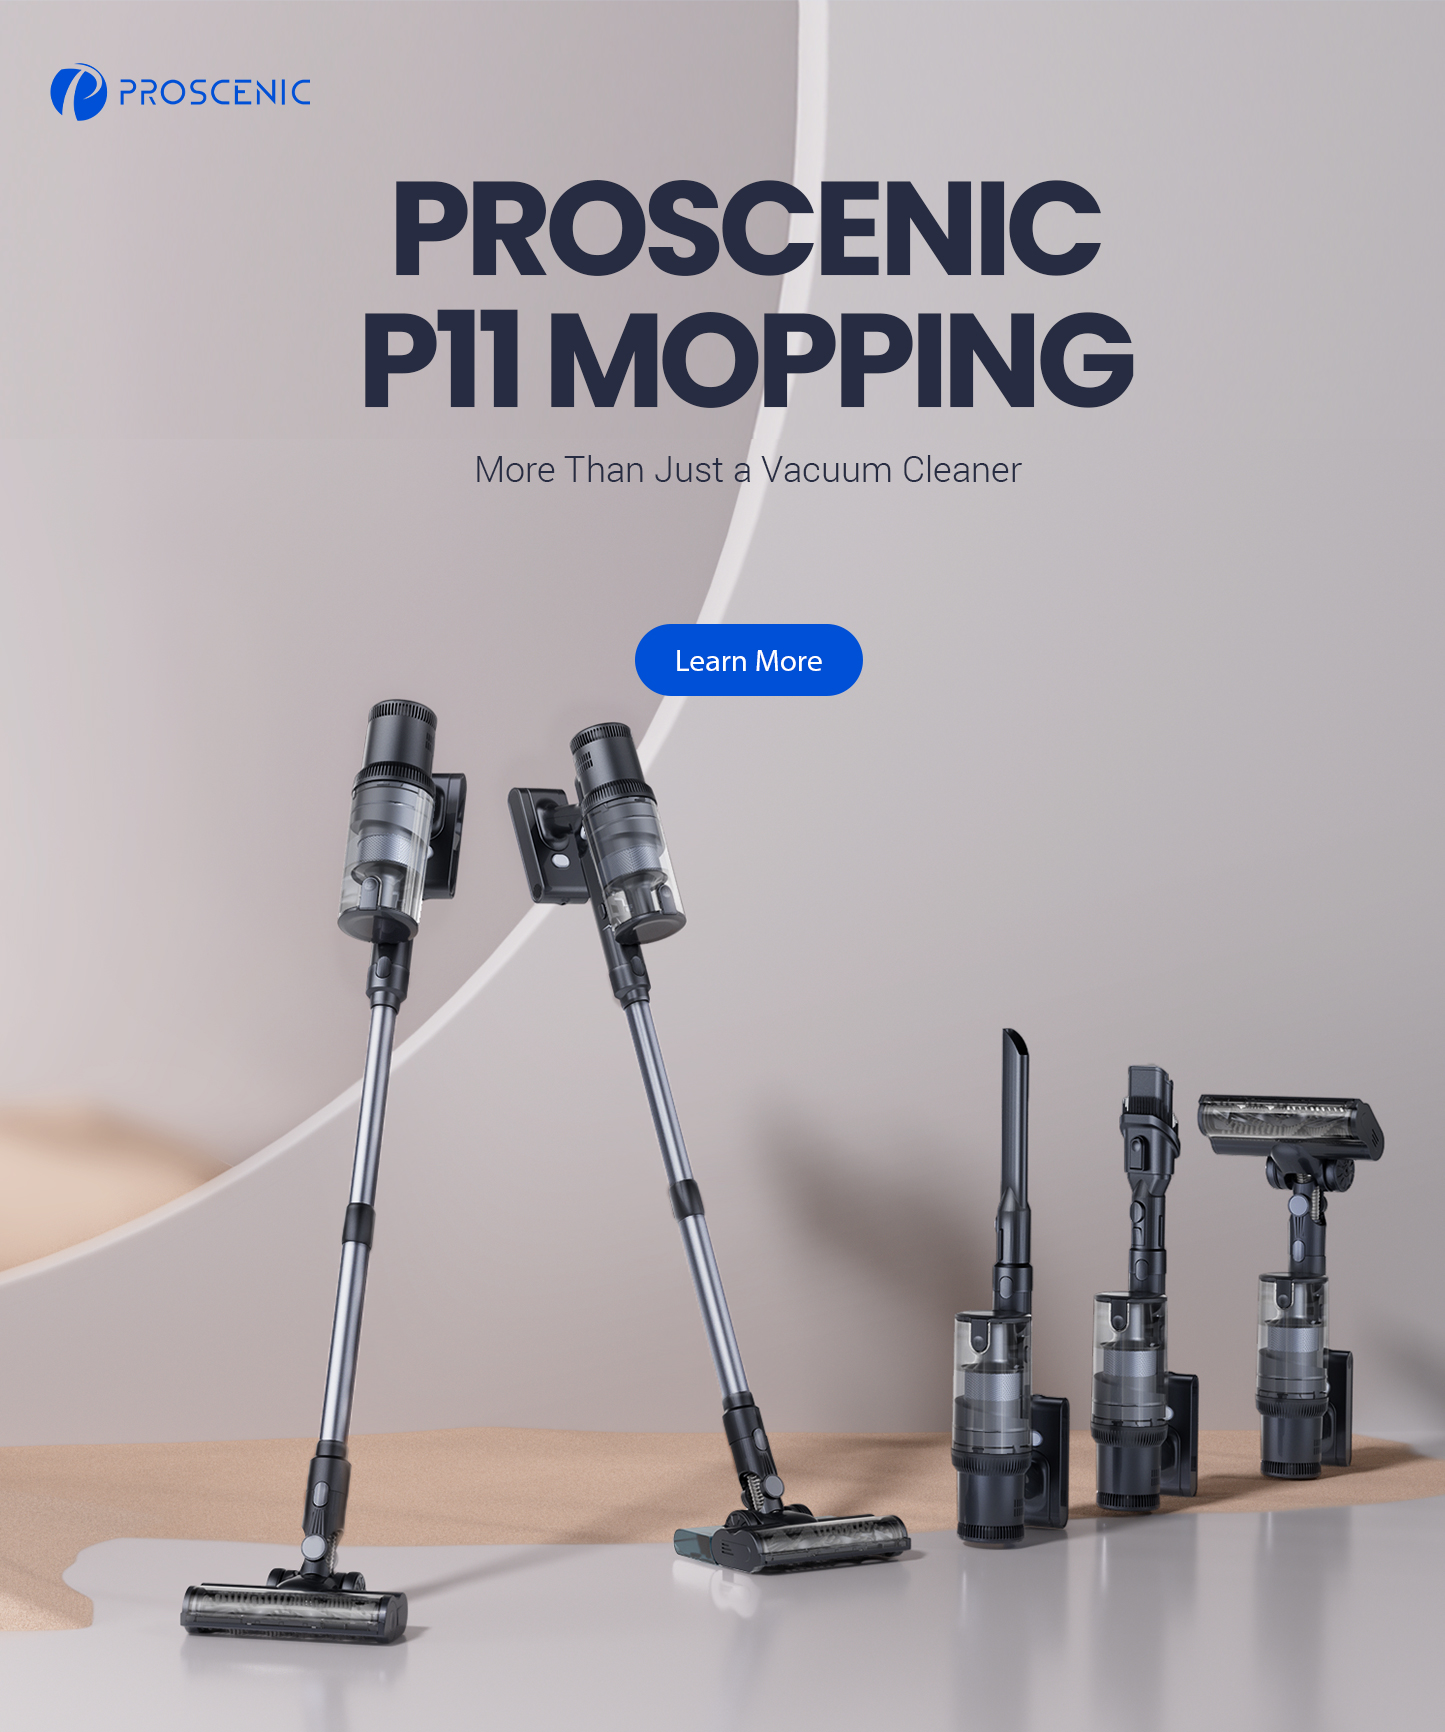 Proscenic V10 floor cleaning robot at €147 shipping from Europe